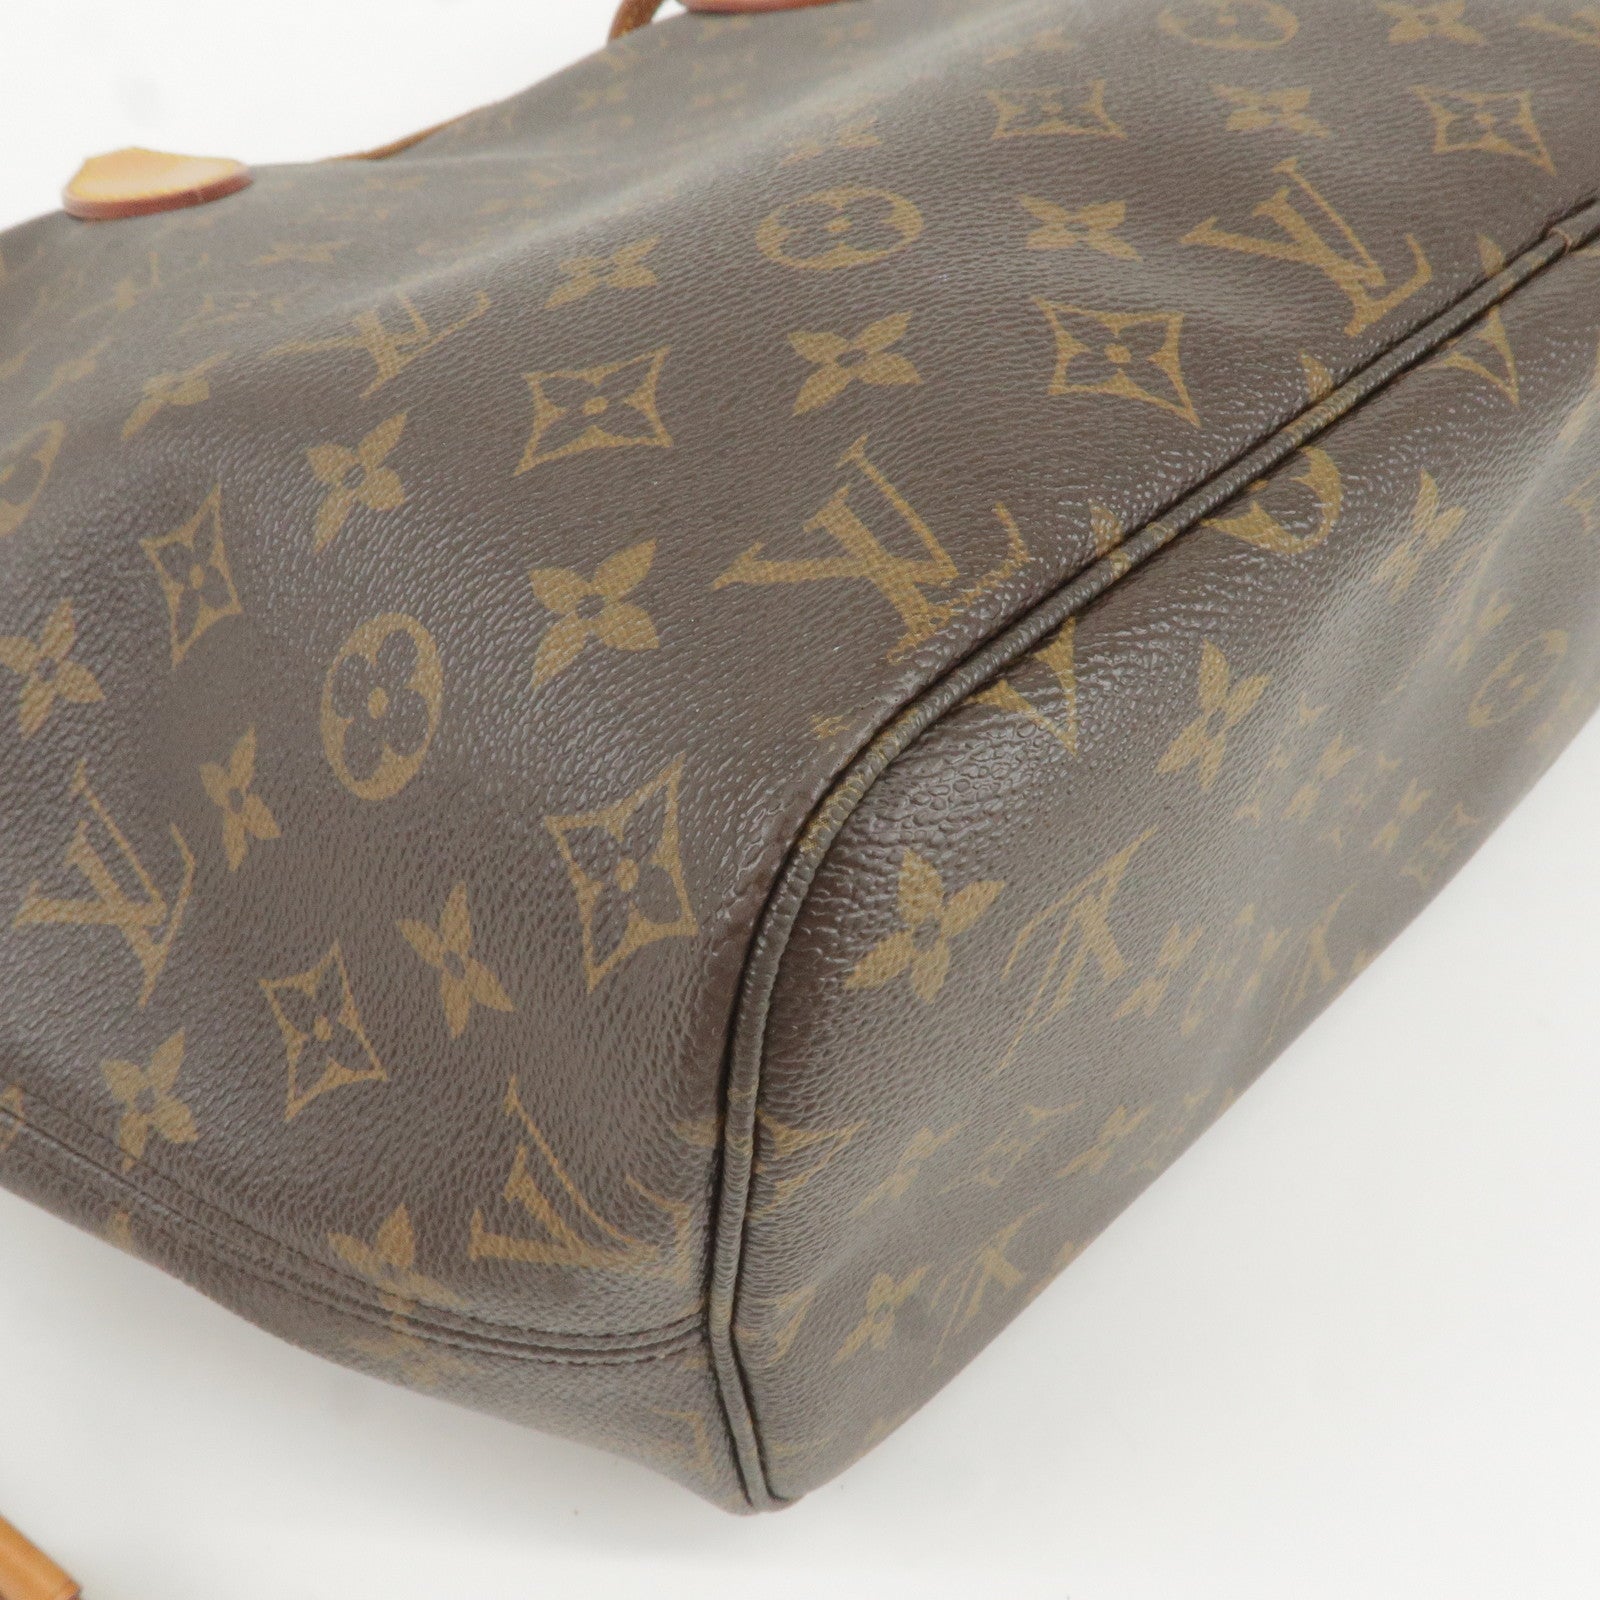 Pre-Owned Louis Vuitton Neverfull Monogram PM Brown 